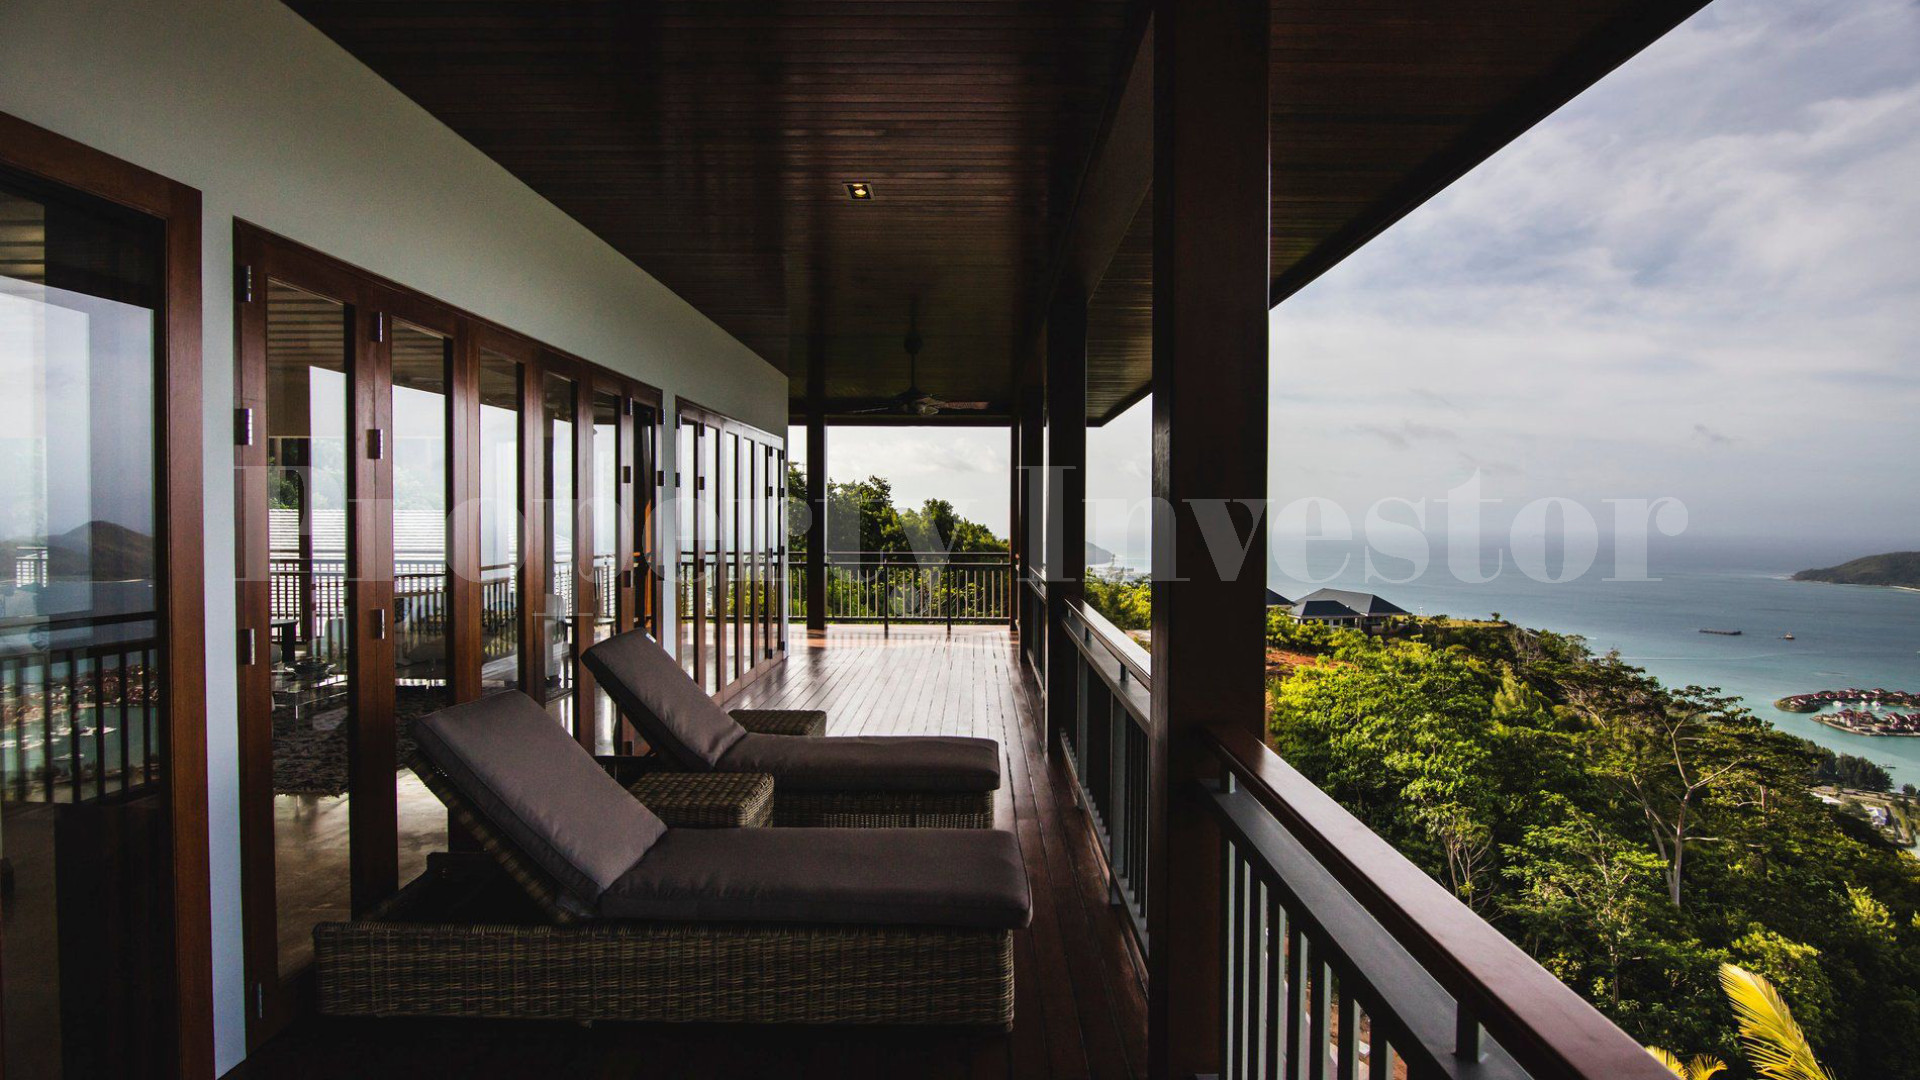 Stunning 6 Bedroom Contemporary Luxury Tropical Hilltop Villa with Breathtaking Ocean Views for Sale in Mahé, Seychelles